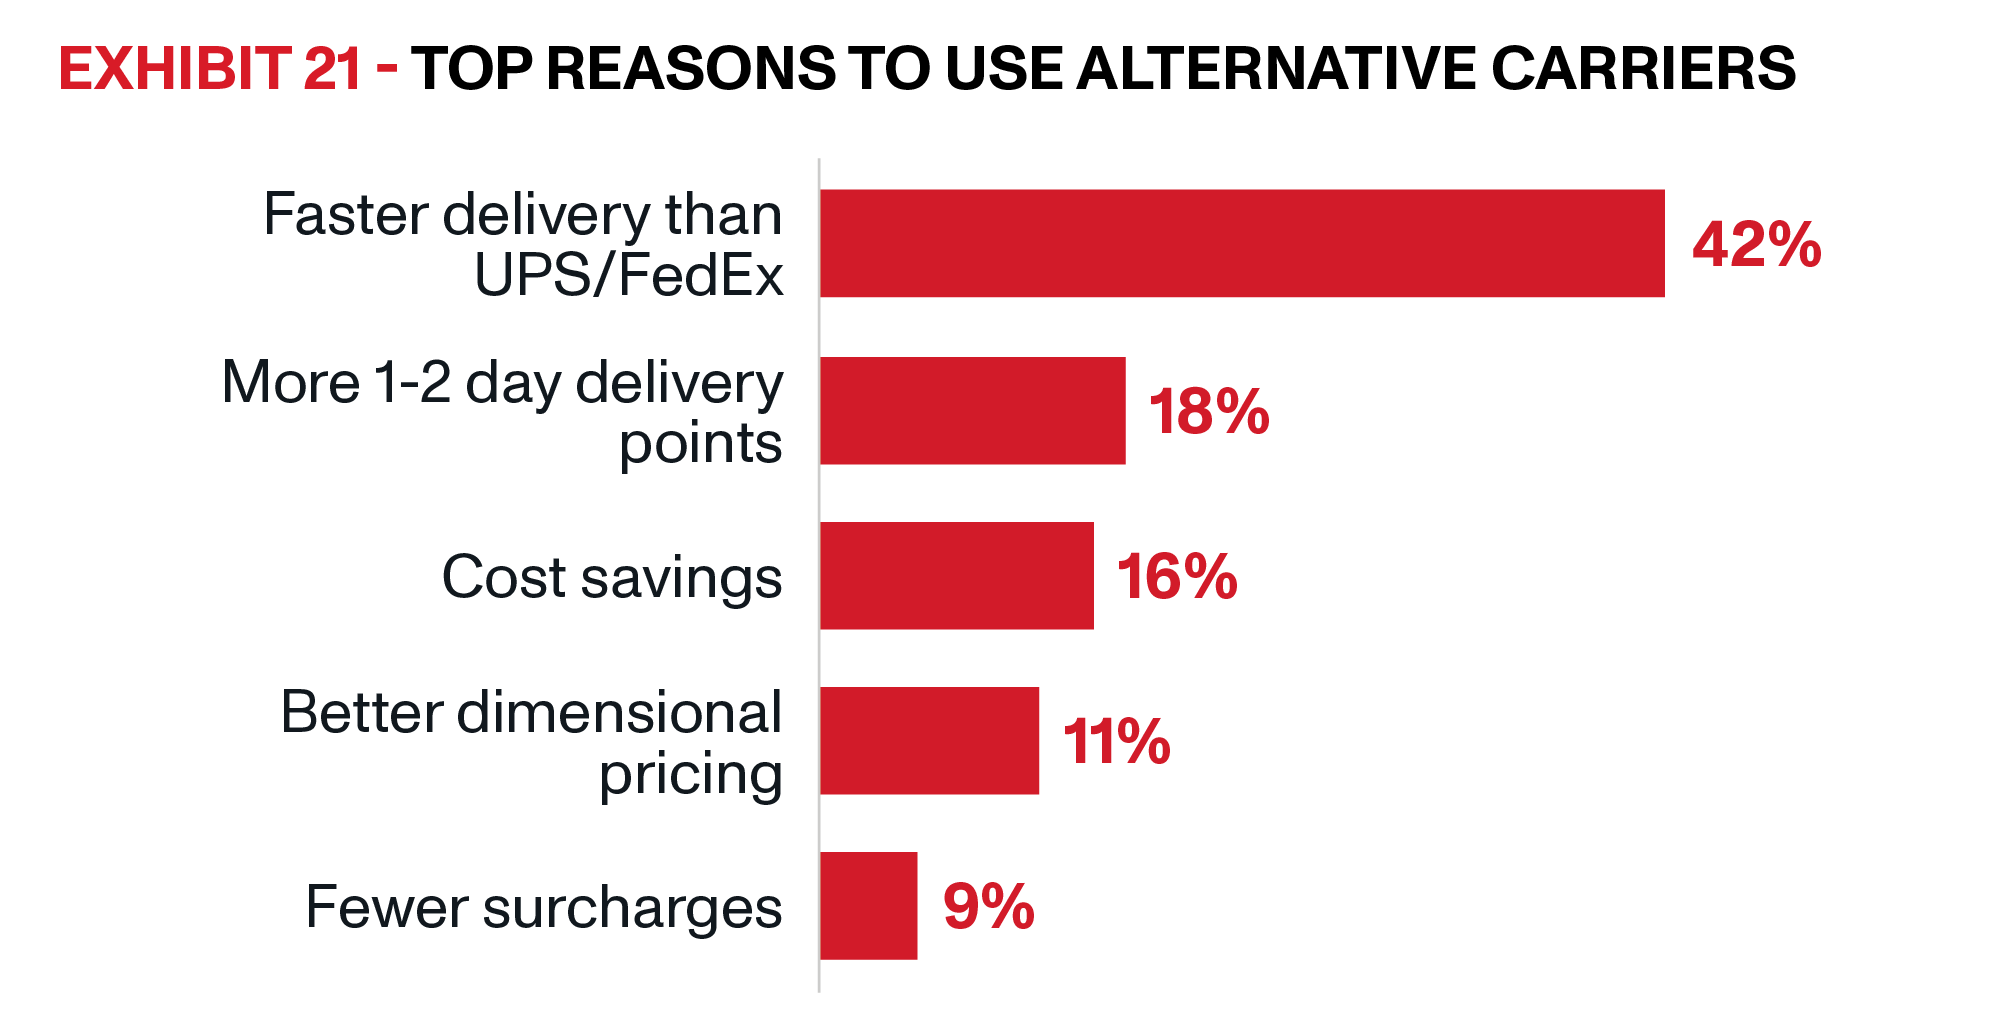 OnTrac | E Commerce Delivery Solutions Whitepaper | Exhibit 21 | Sixty percent of retailers surveyed chose to use alternative carriers due to faster delivery, with another 36% indicating they were influenced by cost savings, as shown in Exhibit 21.